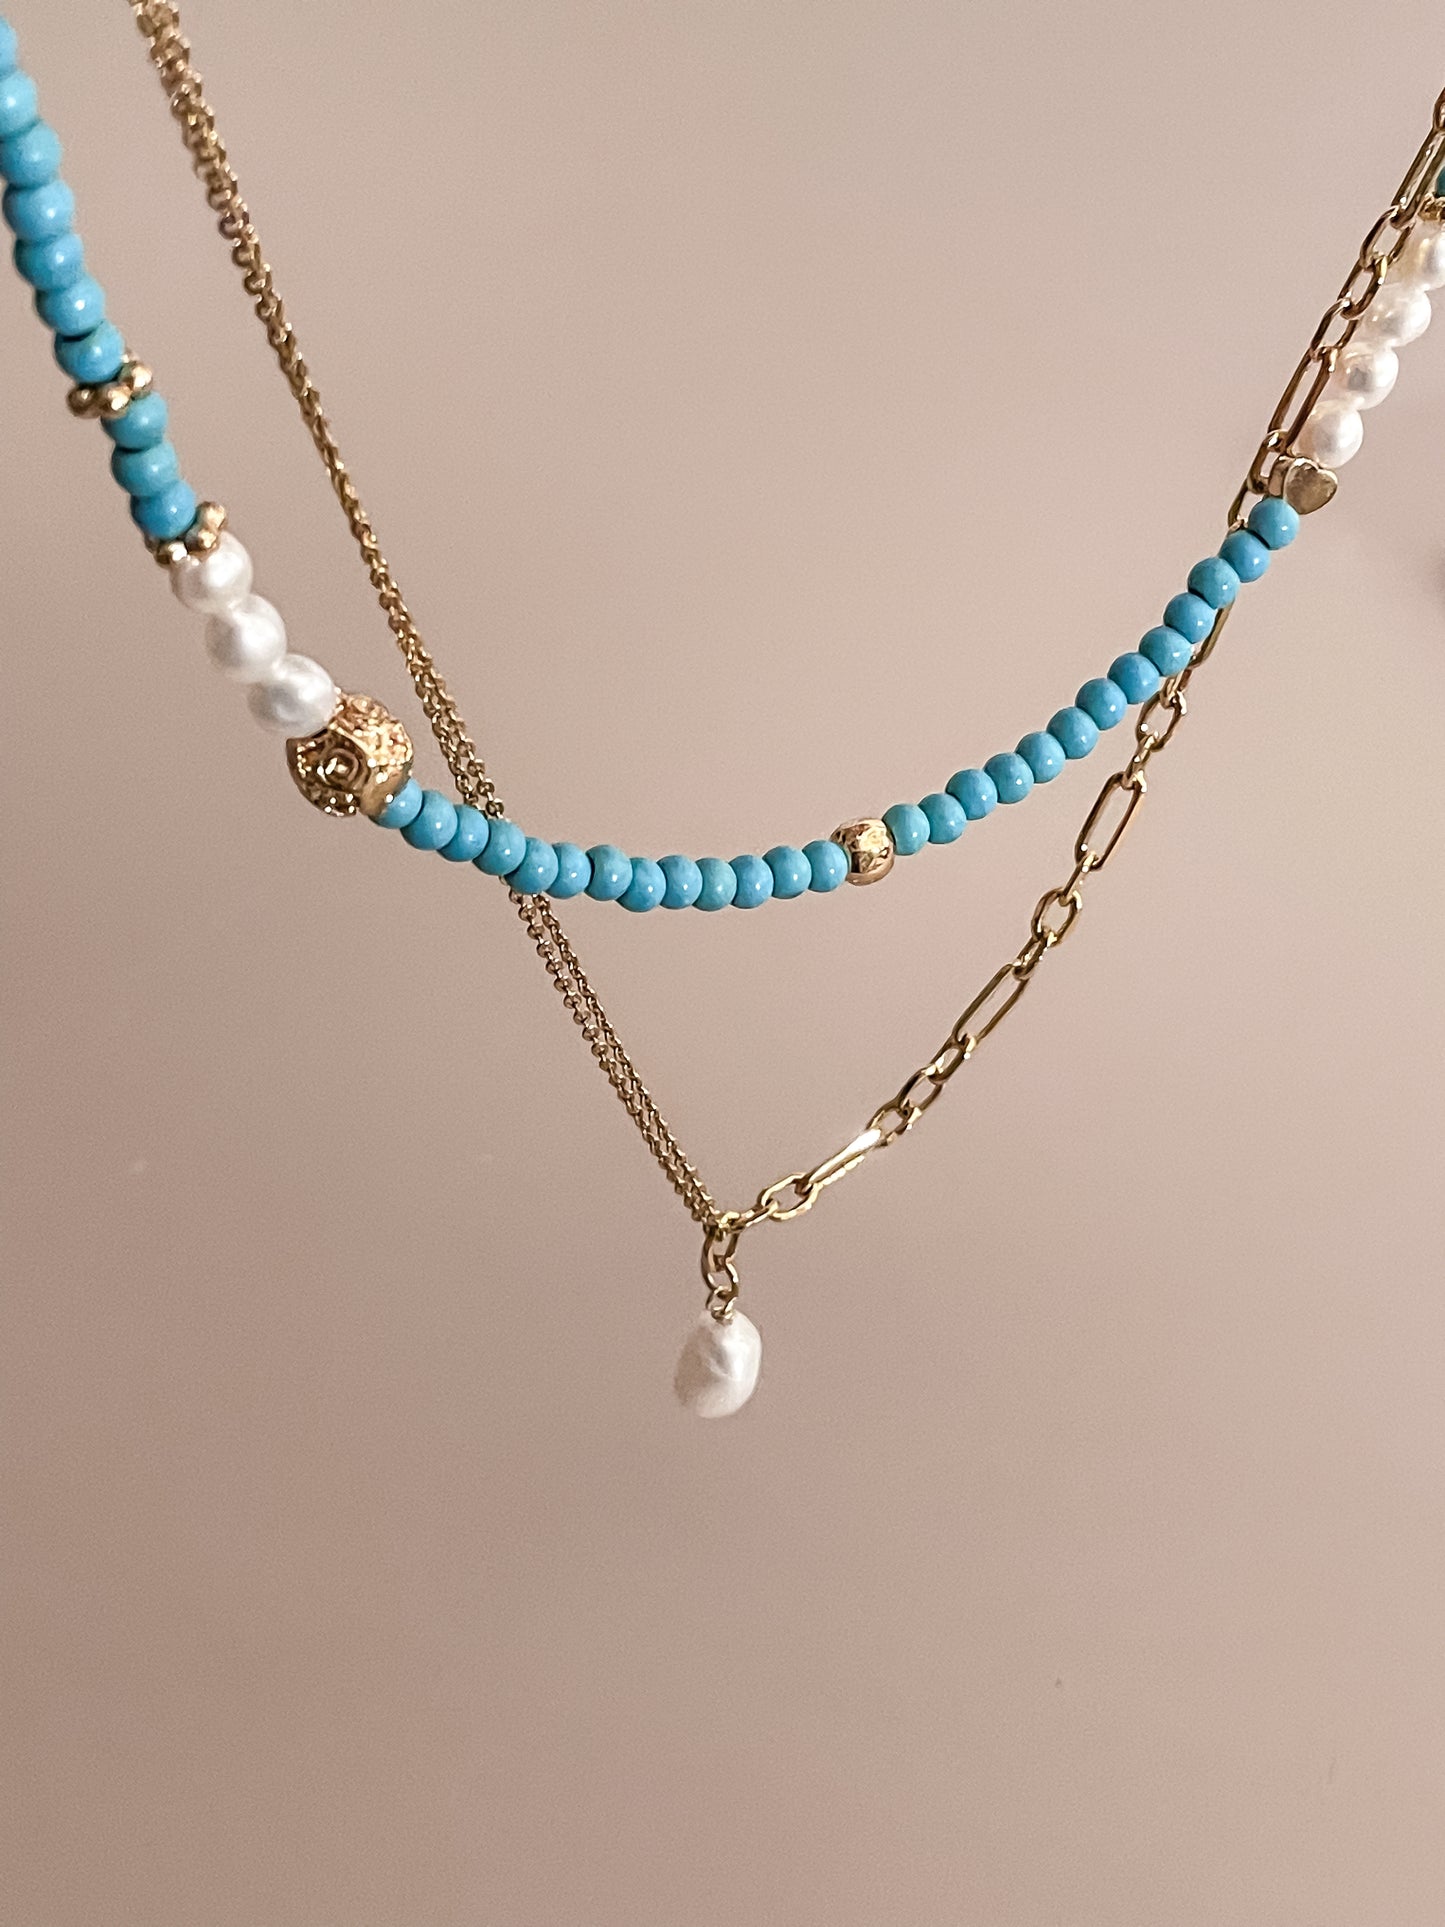 Turquoise Beaded Necklace w/ Pearl